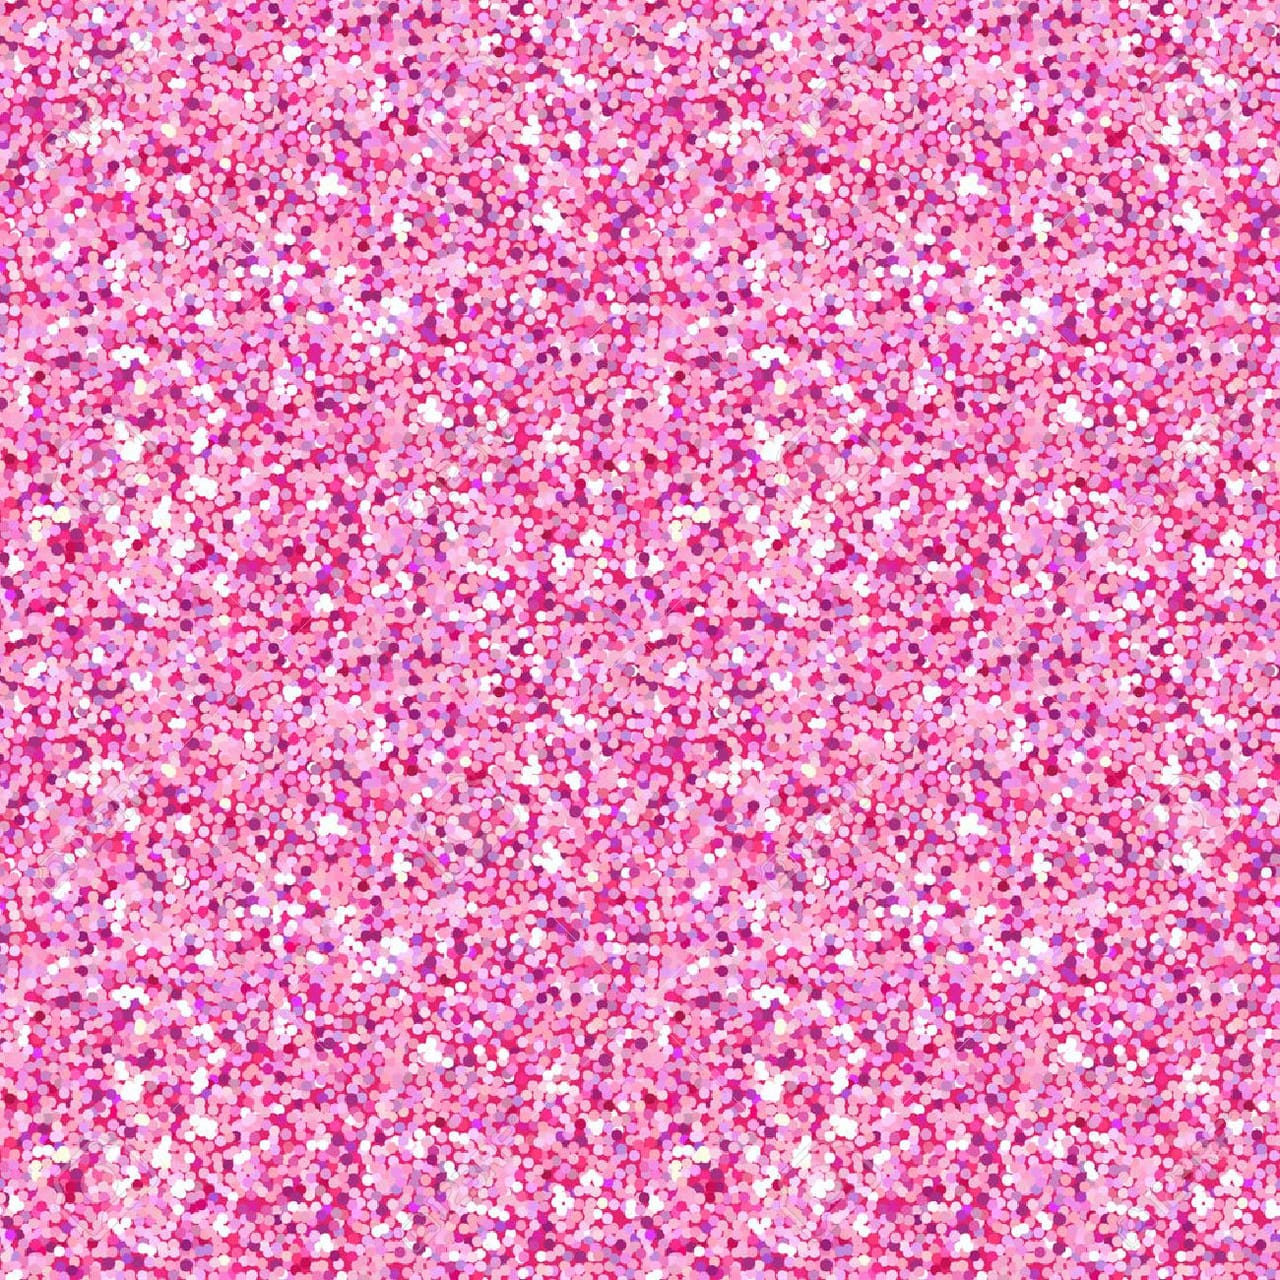 Background, Pattern, And Wallpaper Image - Pink Glitter Background - HD Wallpaper 